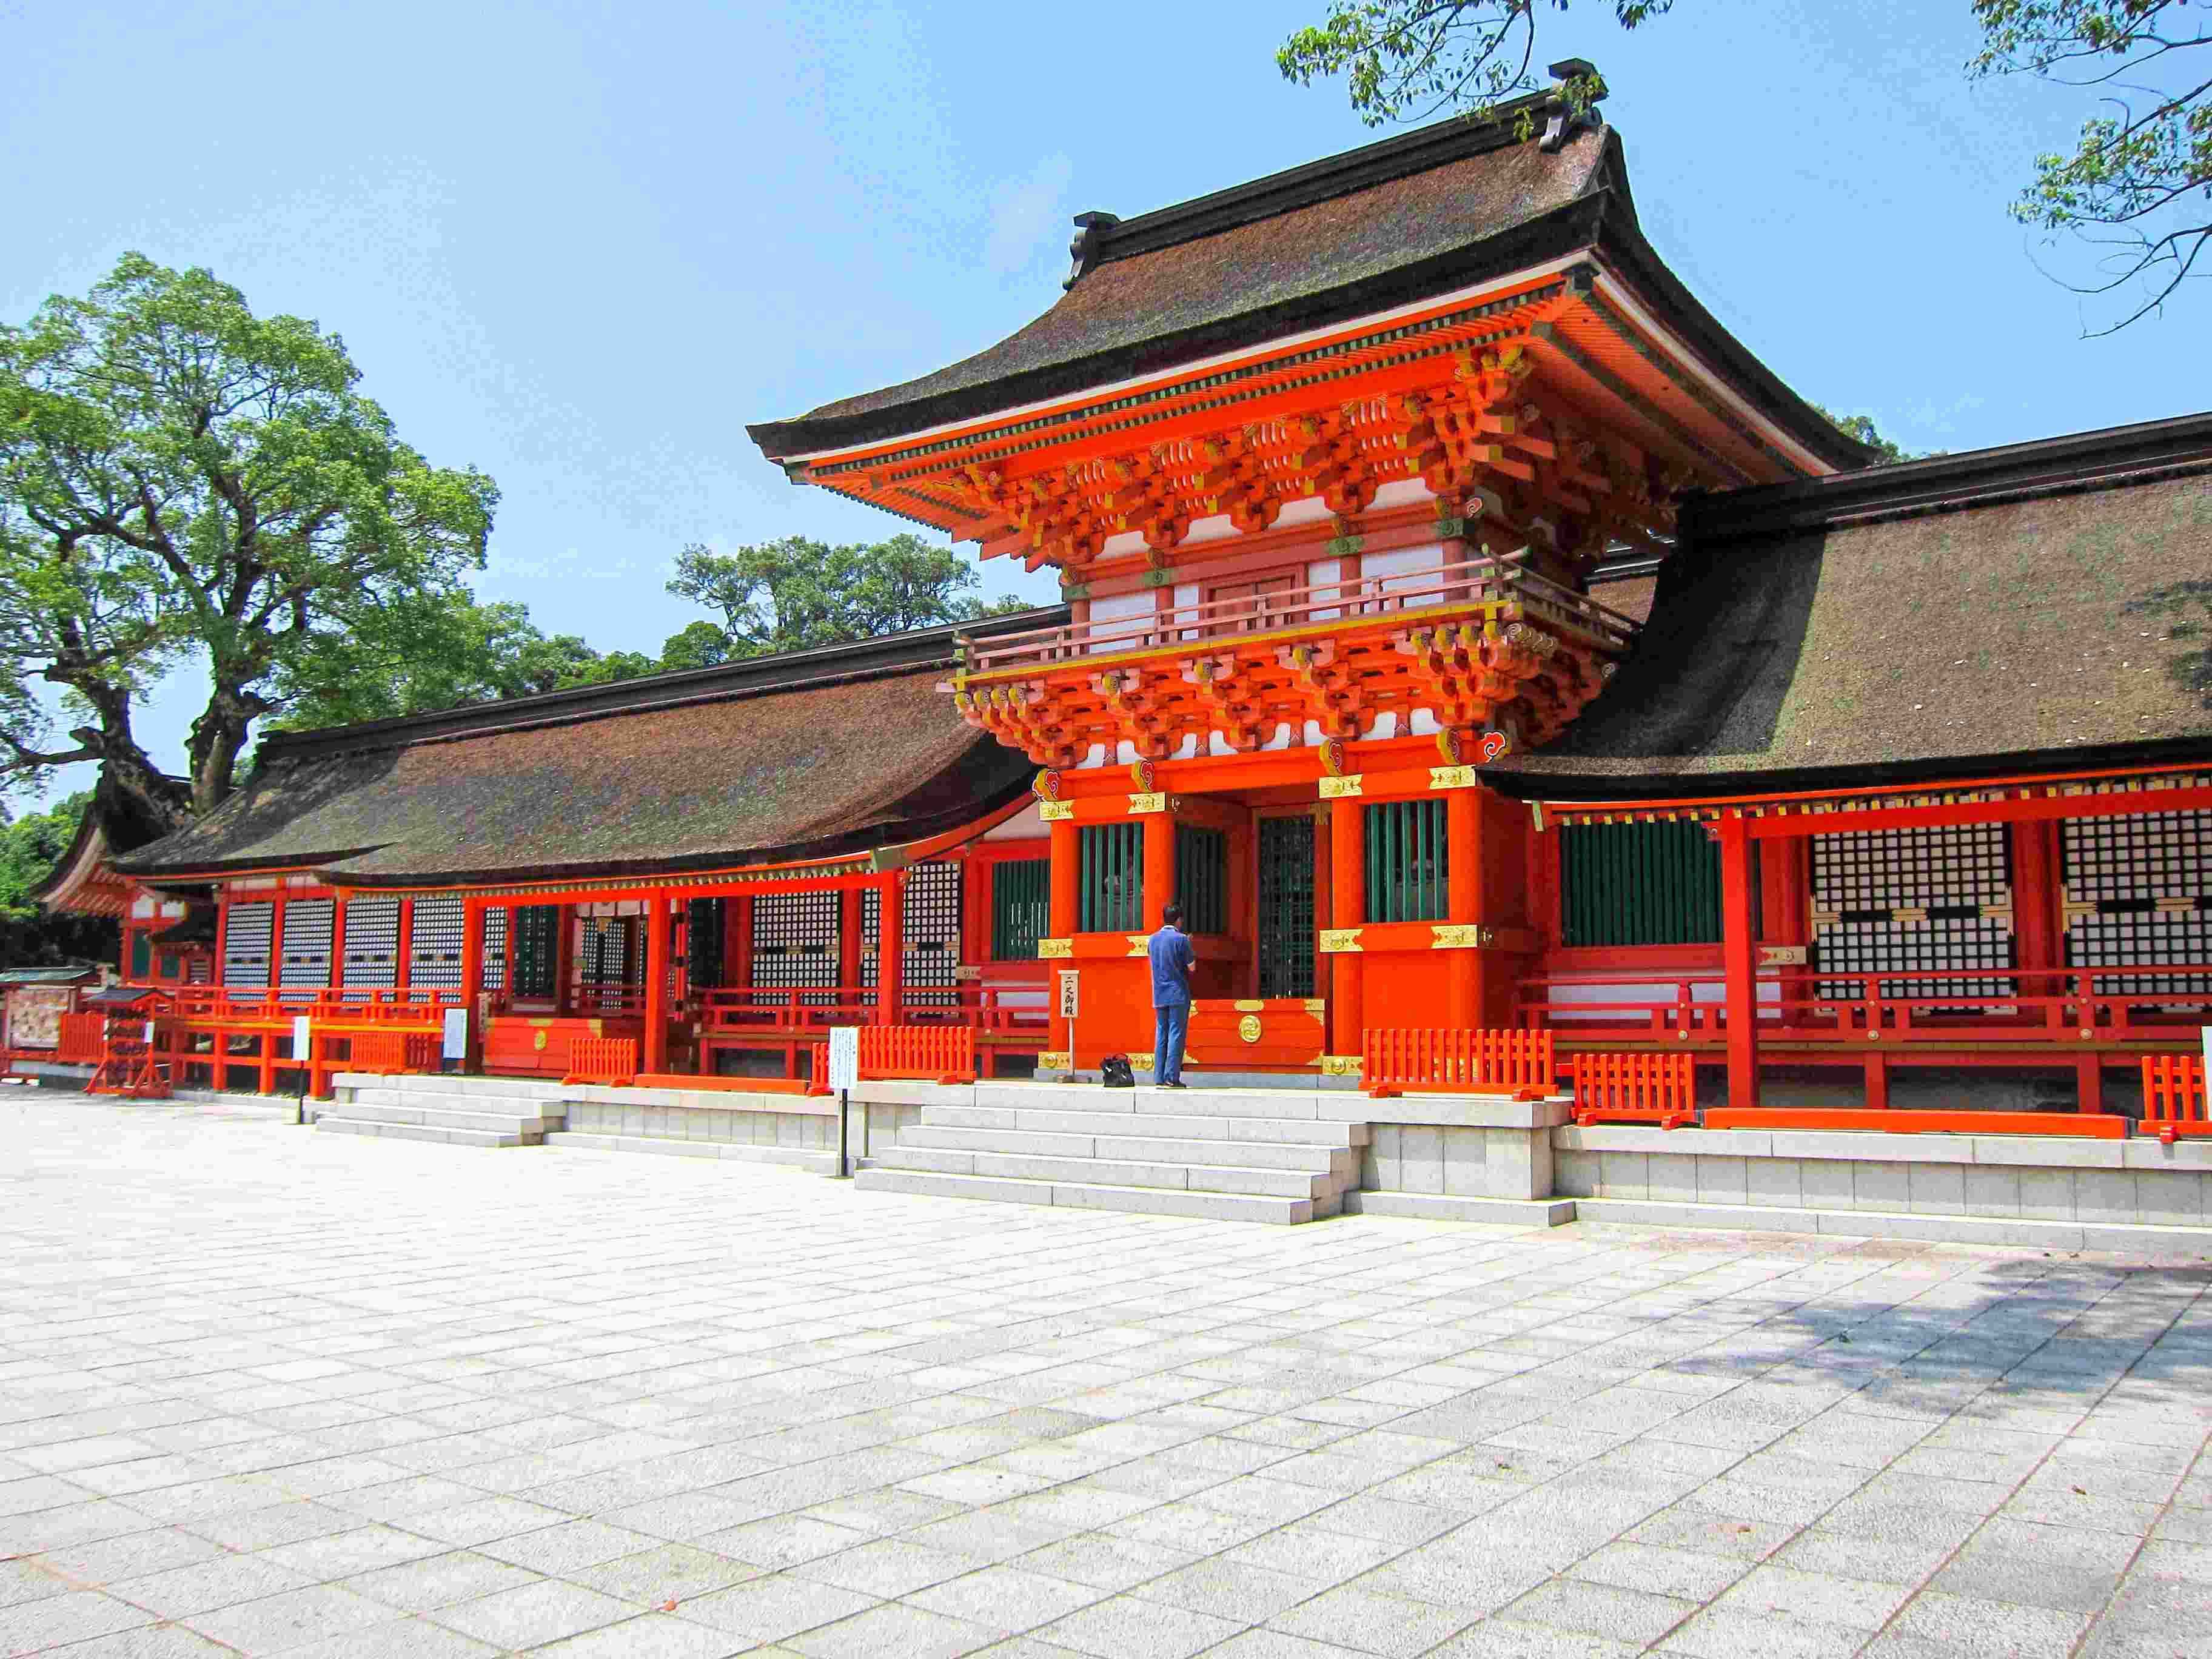 The complex of the shrine where the oracle proclaiming Dōkyō to be the Emperor was received.